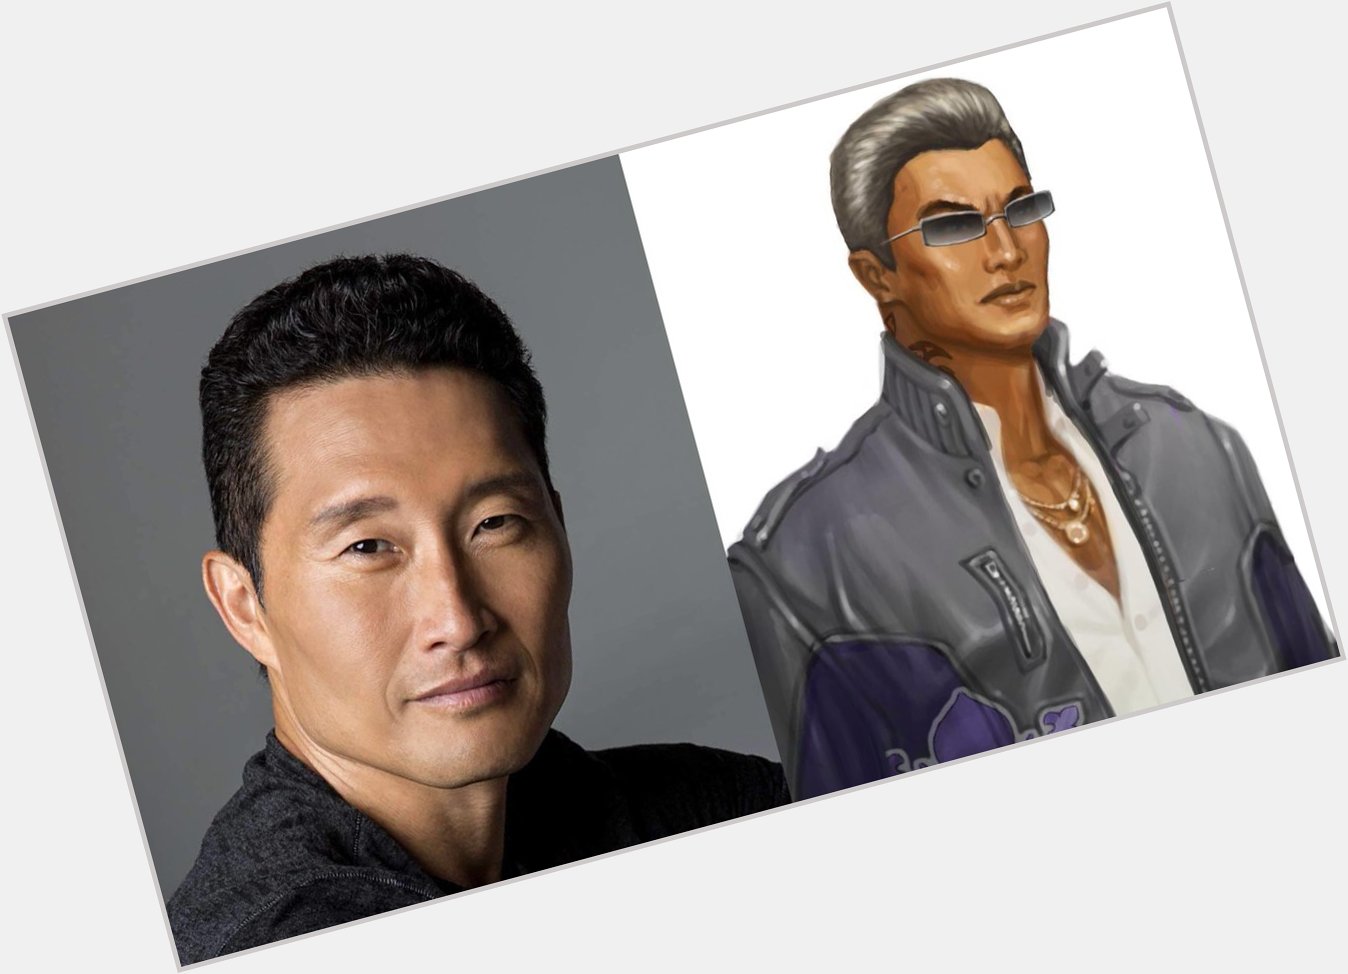 Happy birthday to Daniel Dae Kim, who voices the one and only Johnny Gat! 